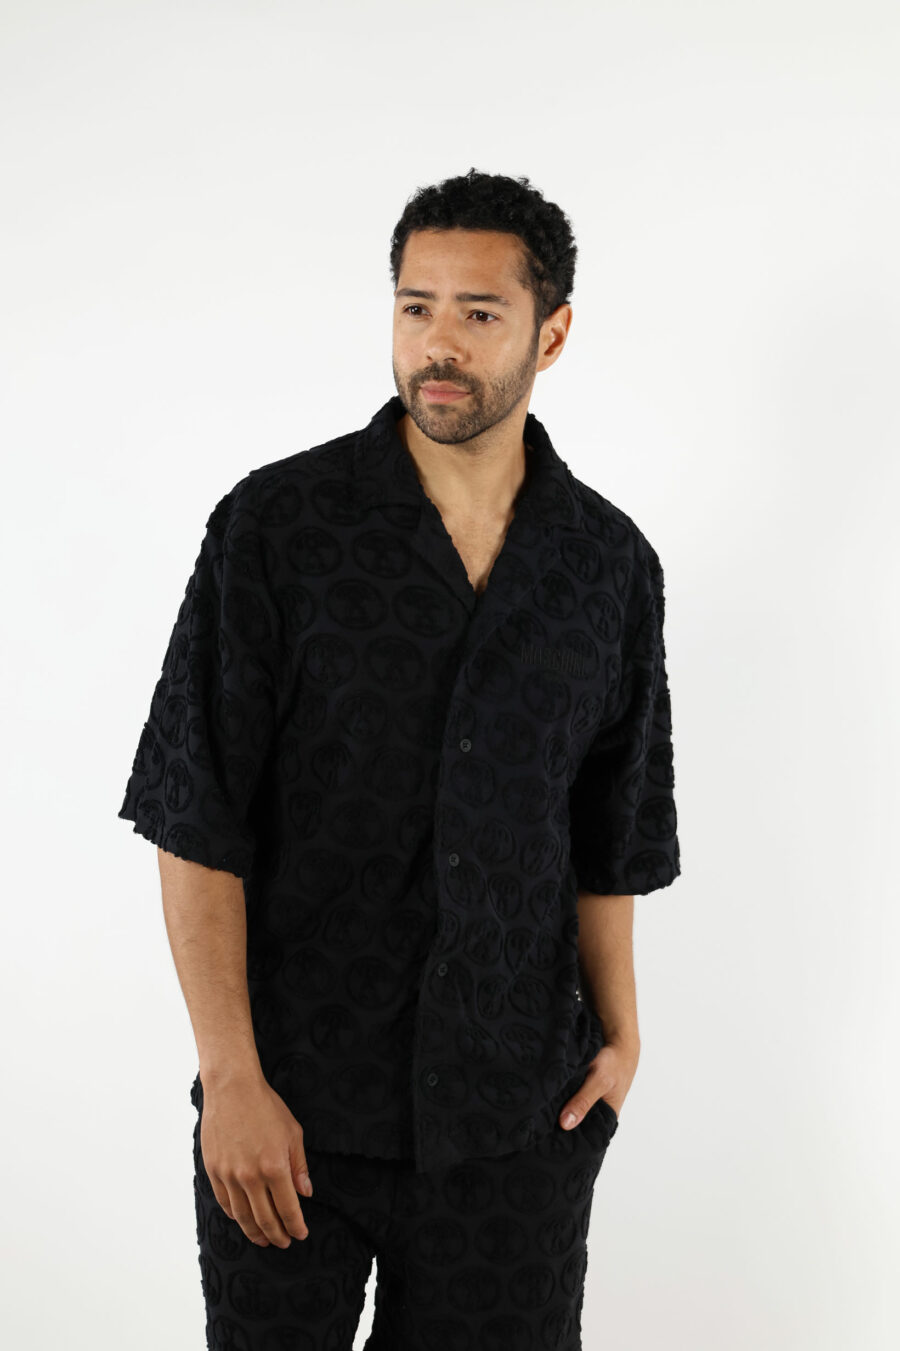 Black short sleeve shirt with "all over logo" double question - 111098